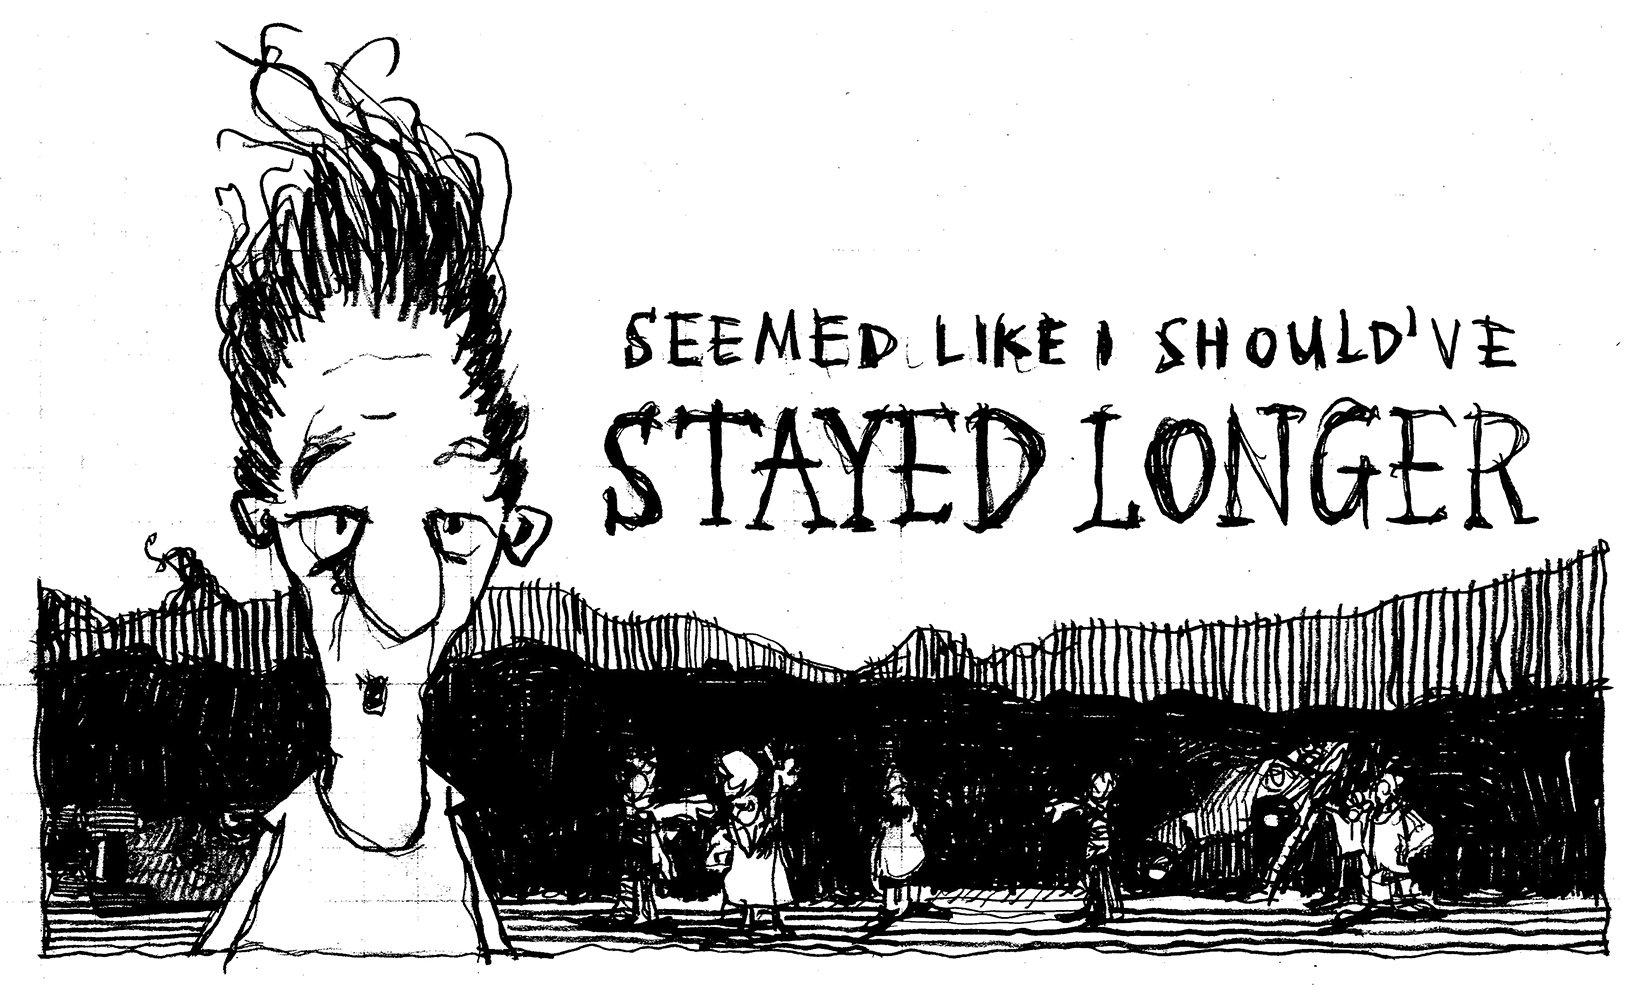 Hand-drawn cartoon that says "Seemed like I should've stayed longer"